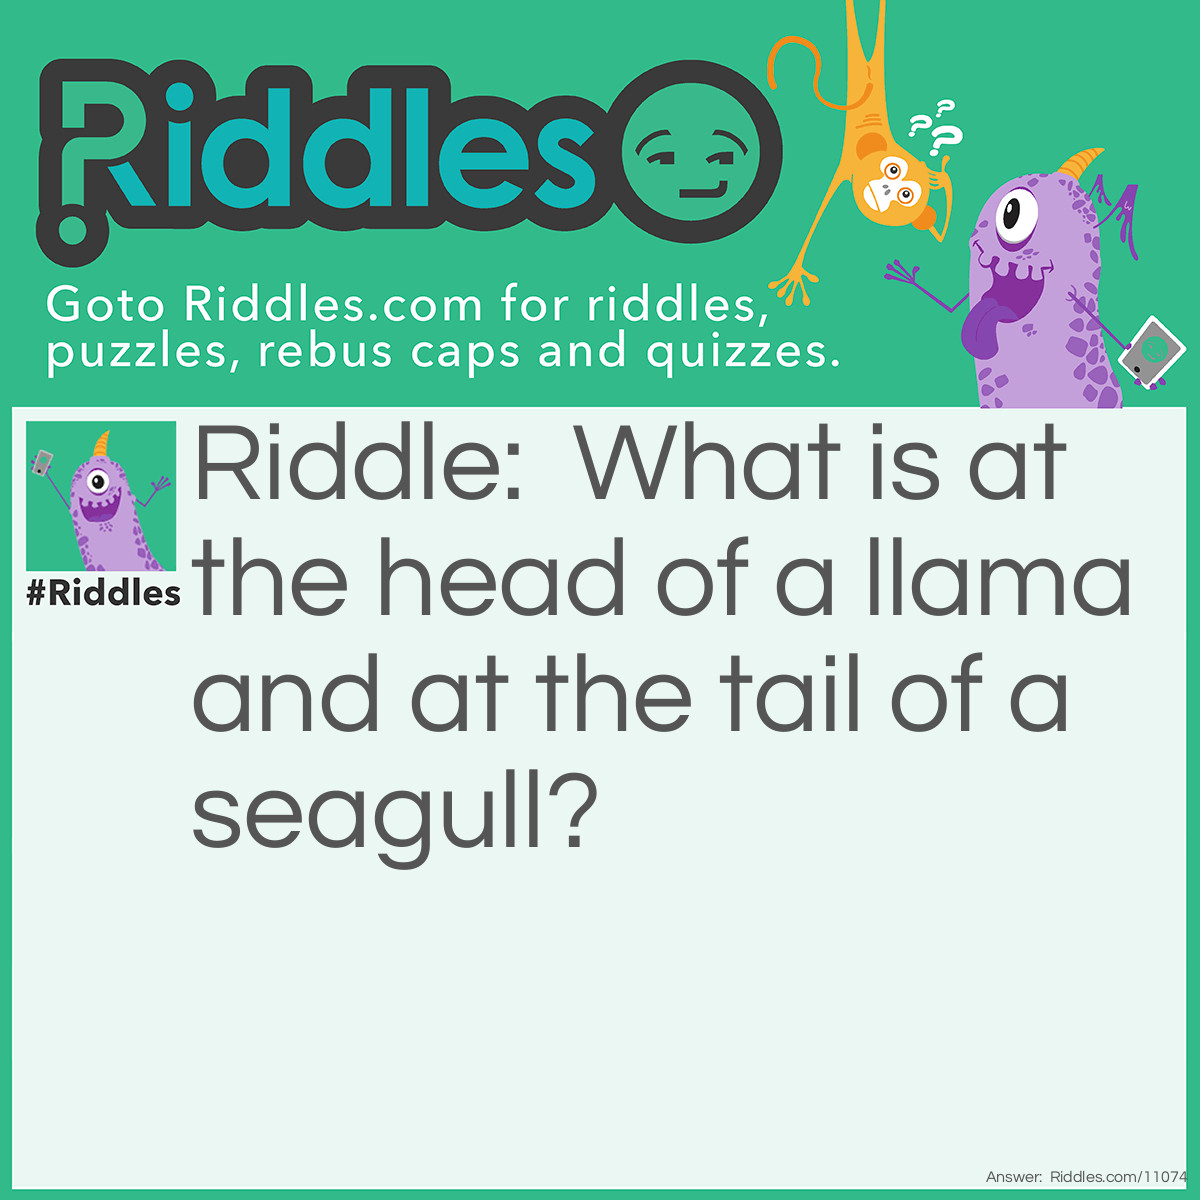 Riddle: What is at the head of a llama and at the tail of a seagull? Answer: Double L.